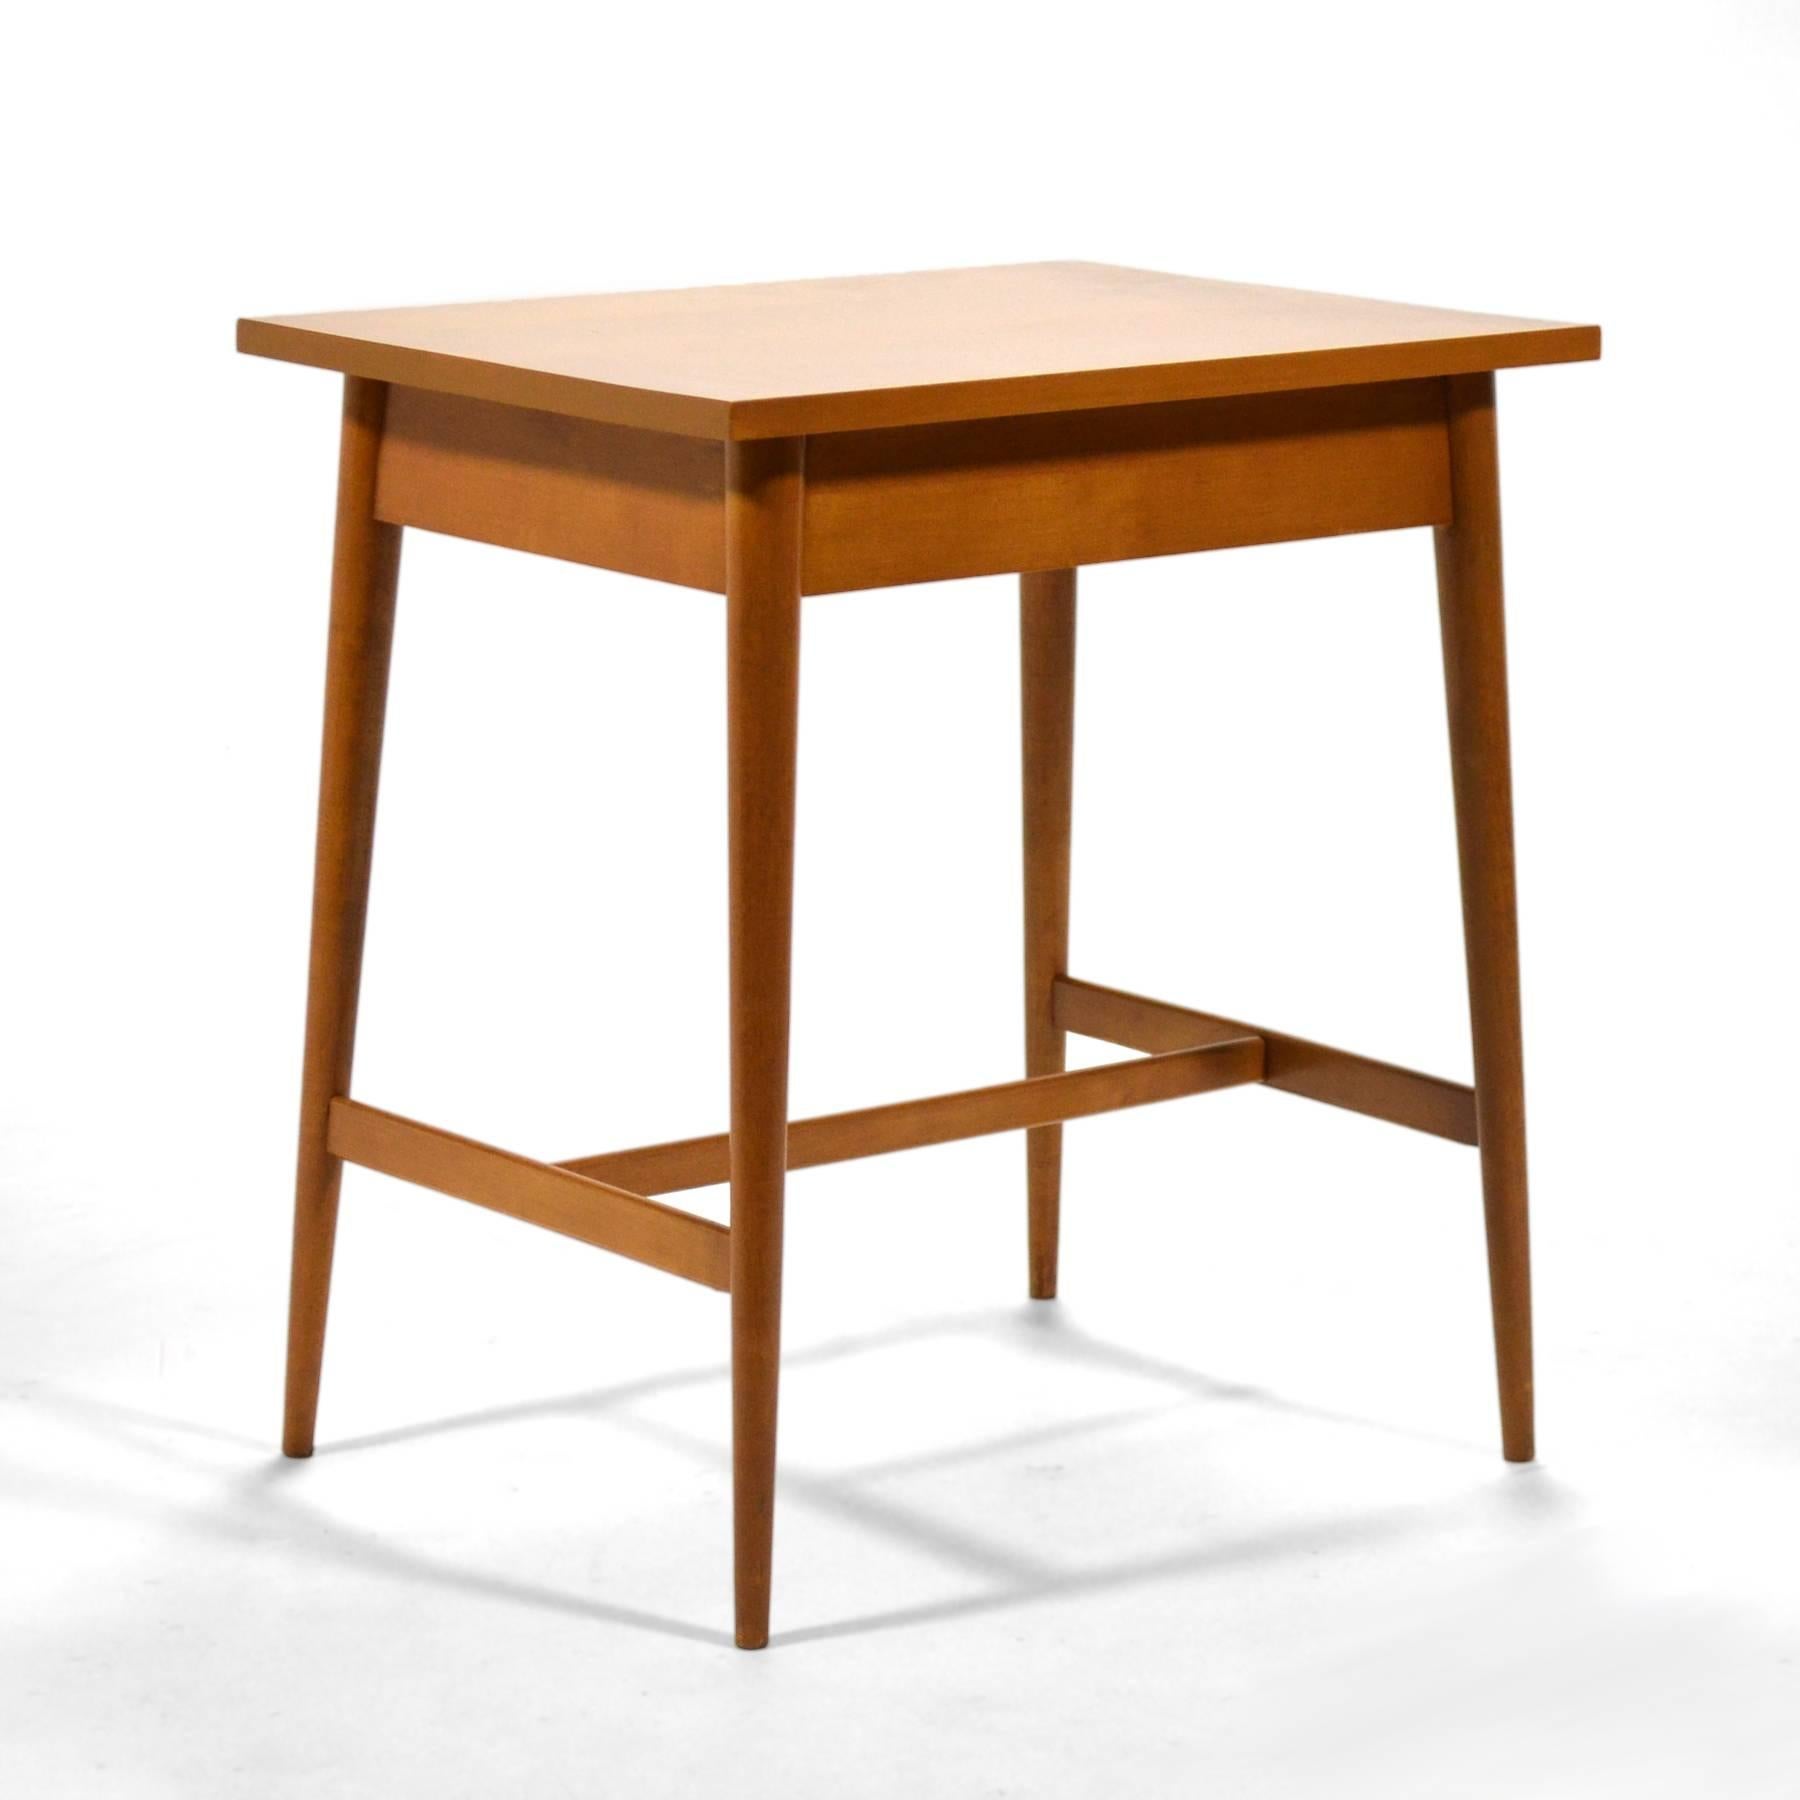 Mid-20th Century Paul McCobb Planner Group Side Table or Nightstand